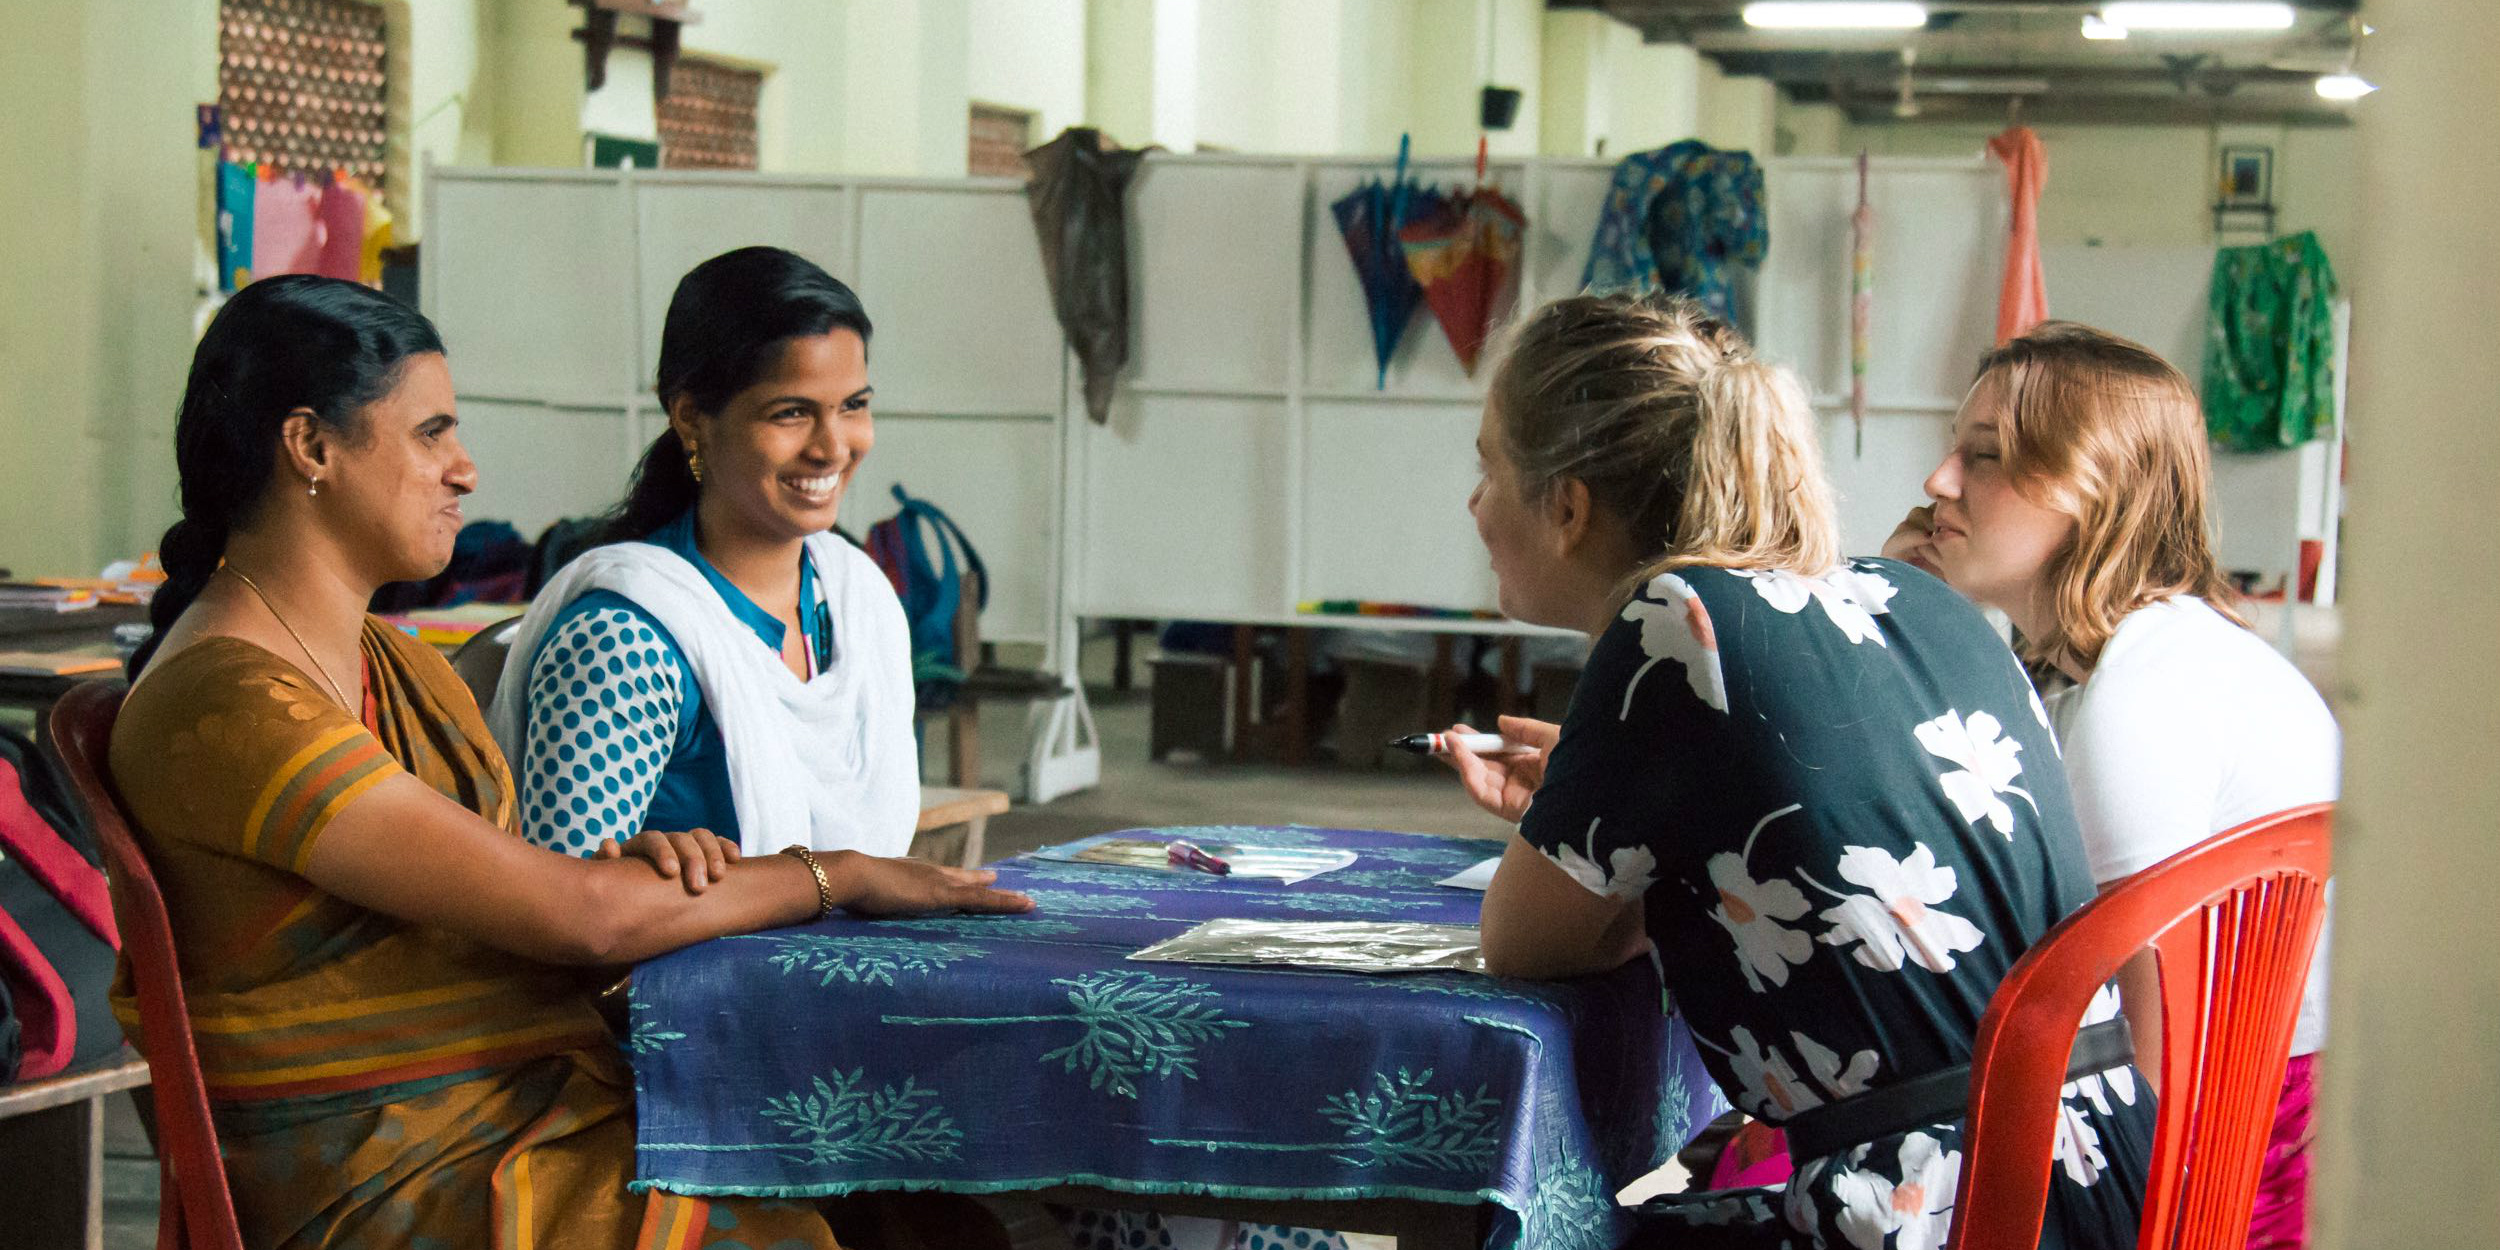 GVI participants engage with local women as part of a women's empowerment program.